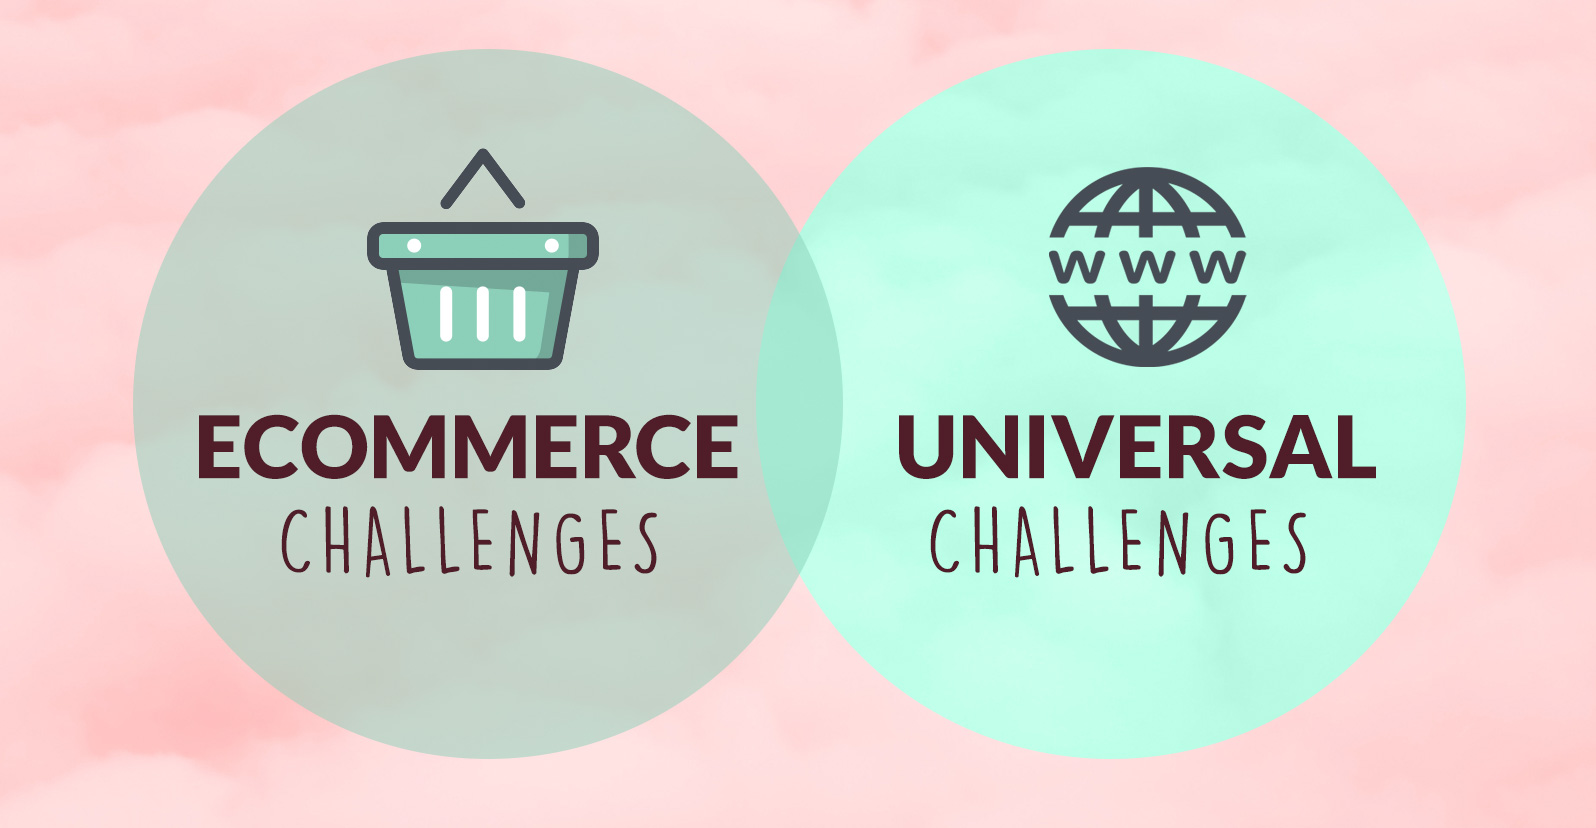 SEO for Ecommerce Sites Vs Other Websites